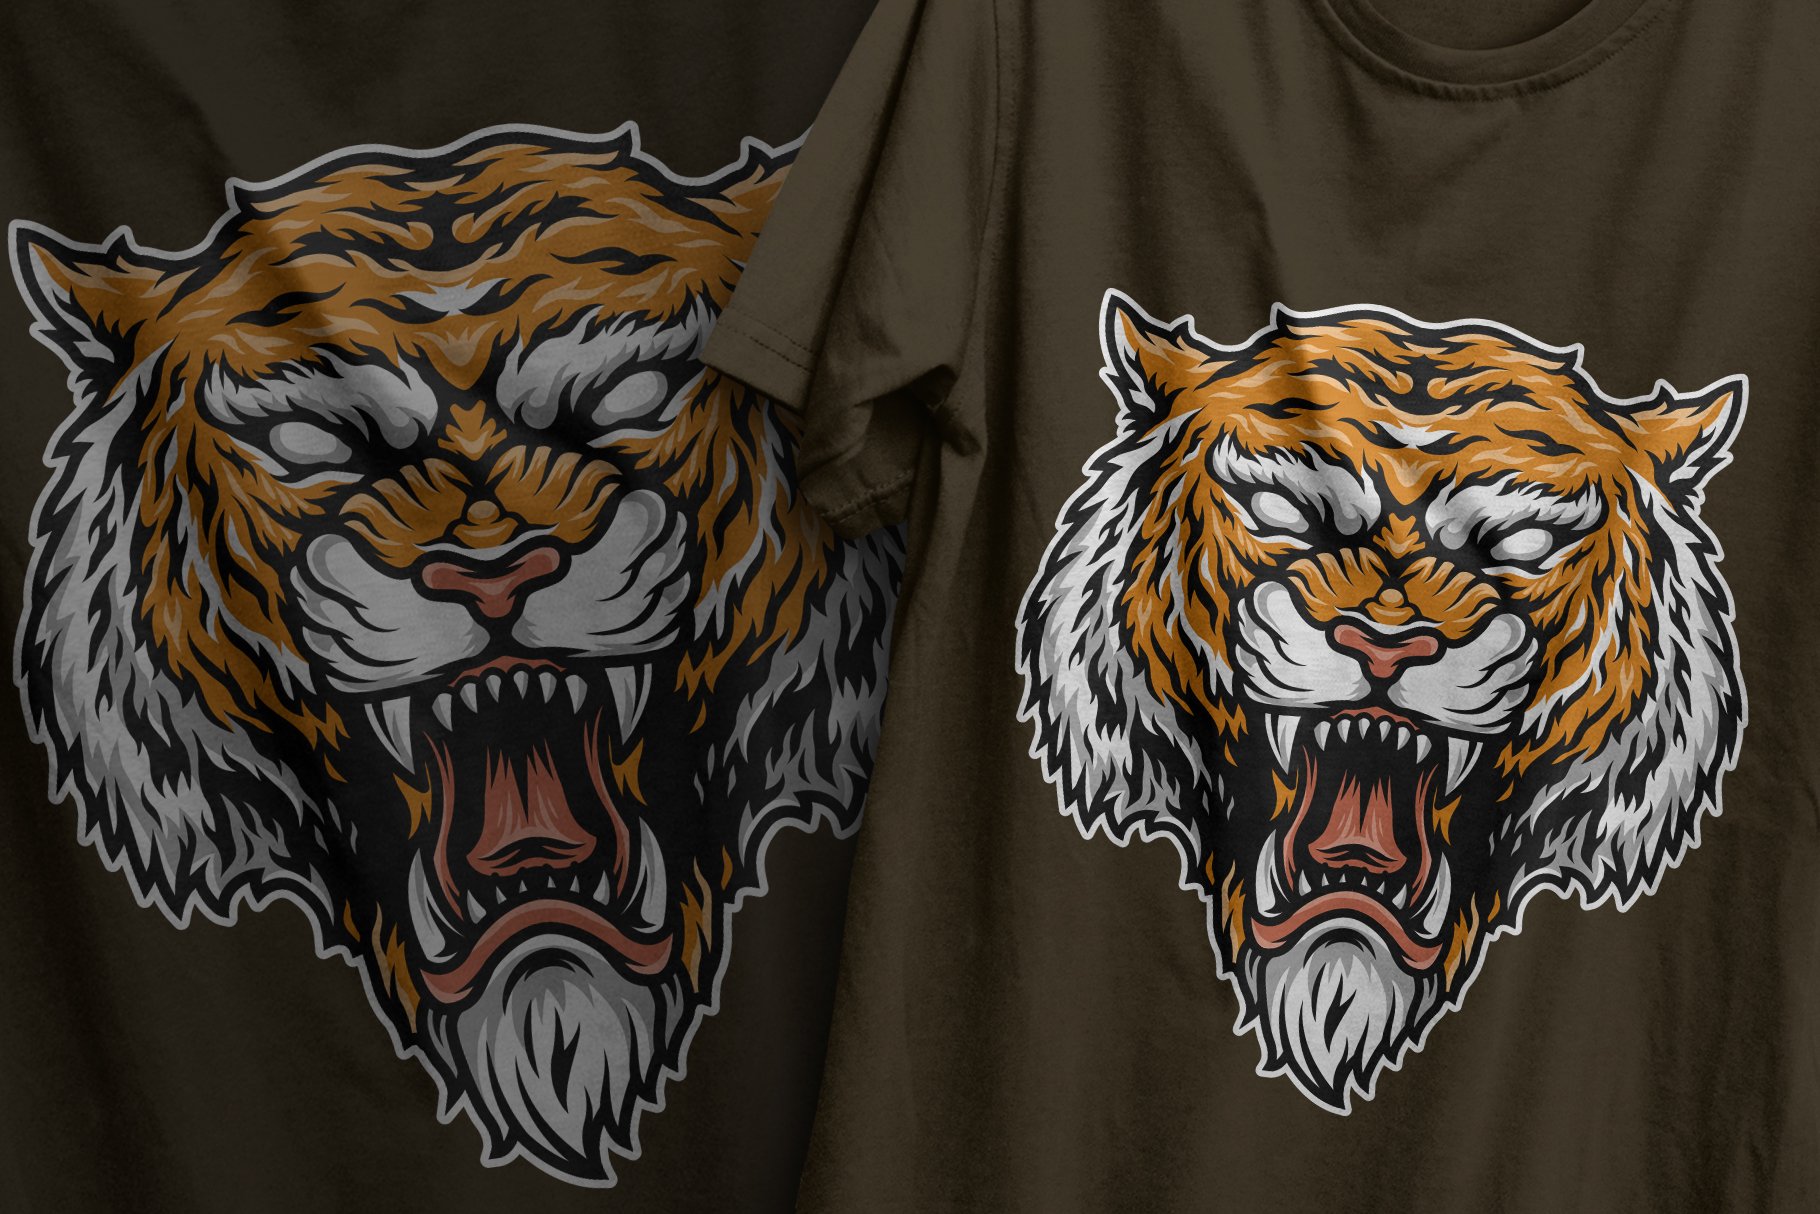 Vintage Angry Tiger Head Design cover image.